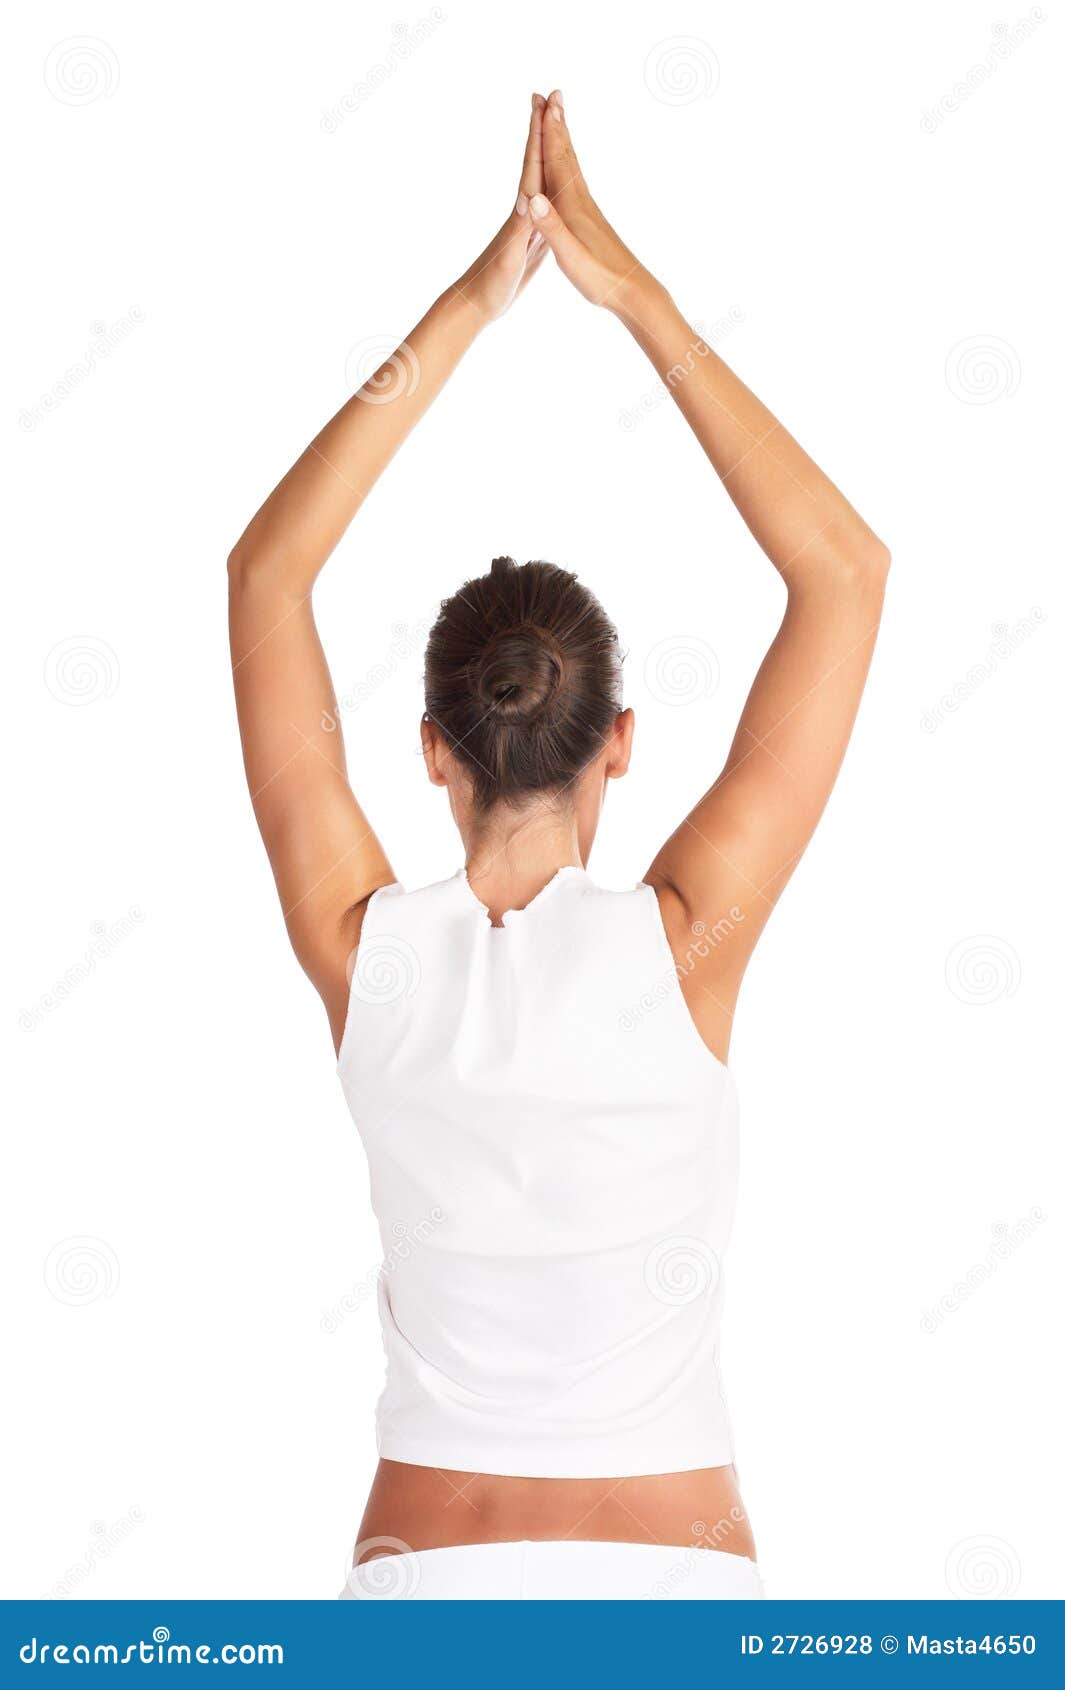 Doing exercises for the spine. Young woman in underwear is in the studio  Stock Photo by mstandret